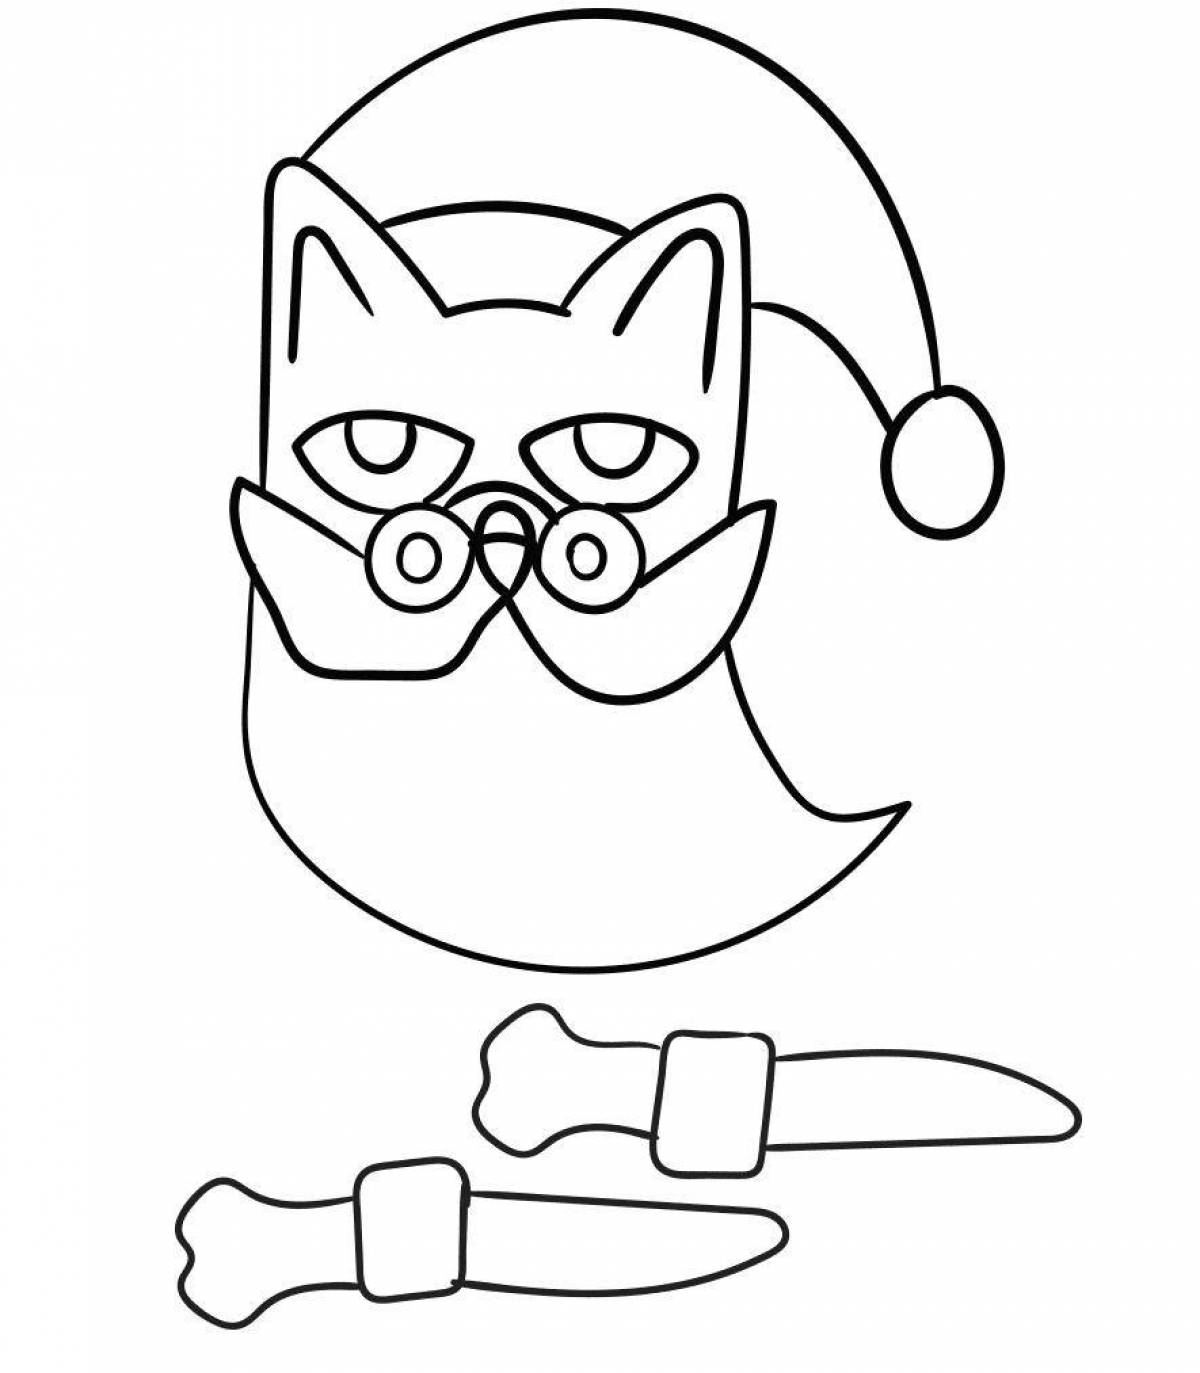 Bright coloring cat with glasses